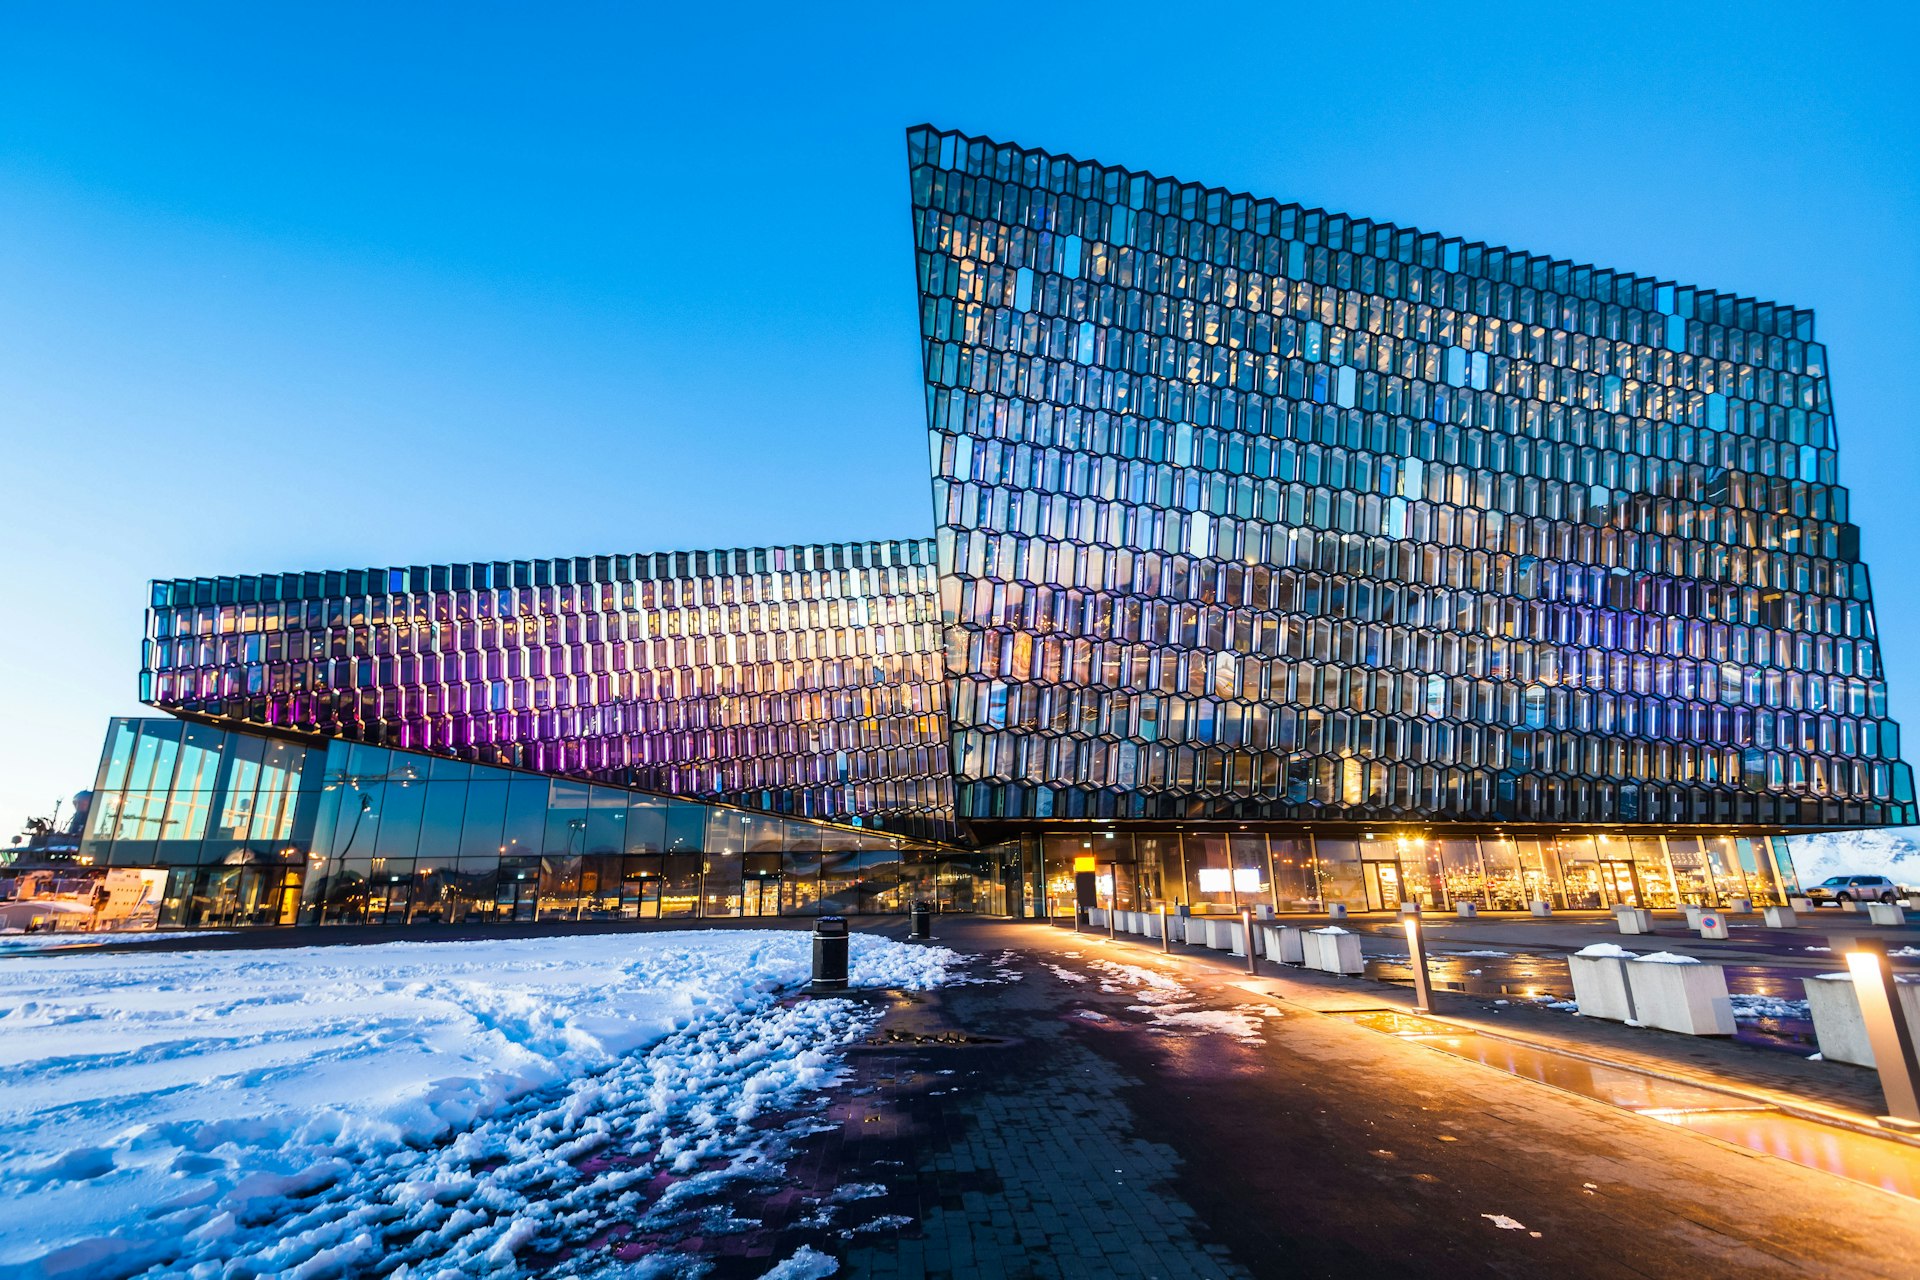 Harpa Concert Hall view at sunset in Reykjavik